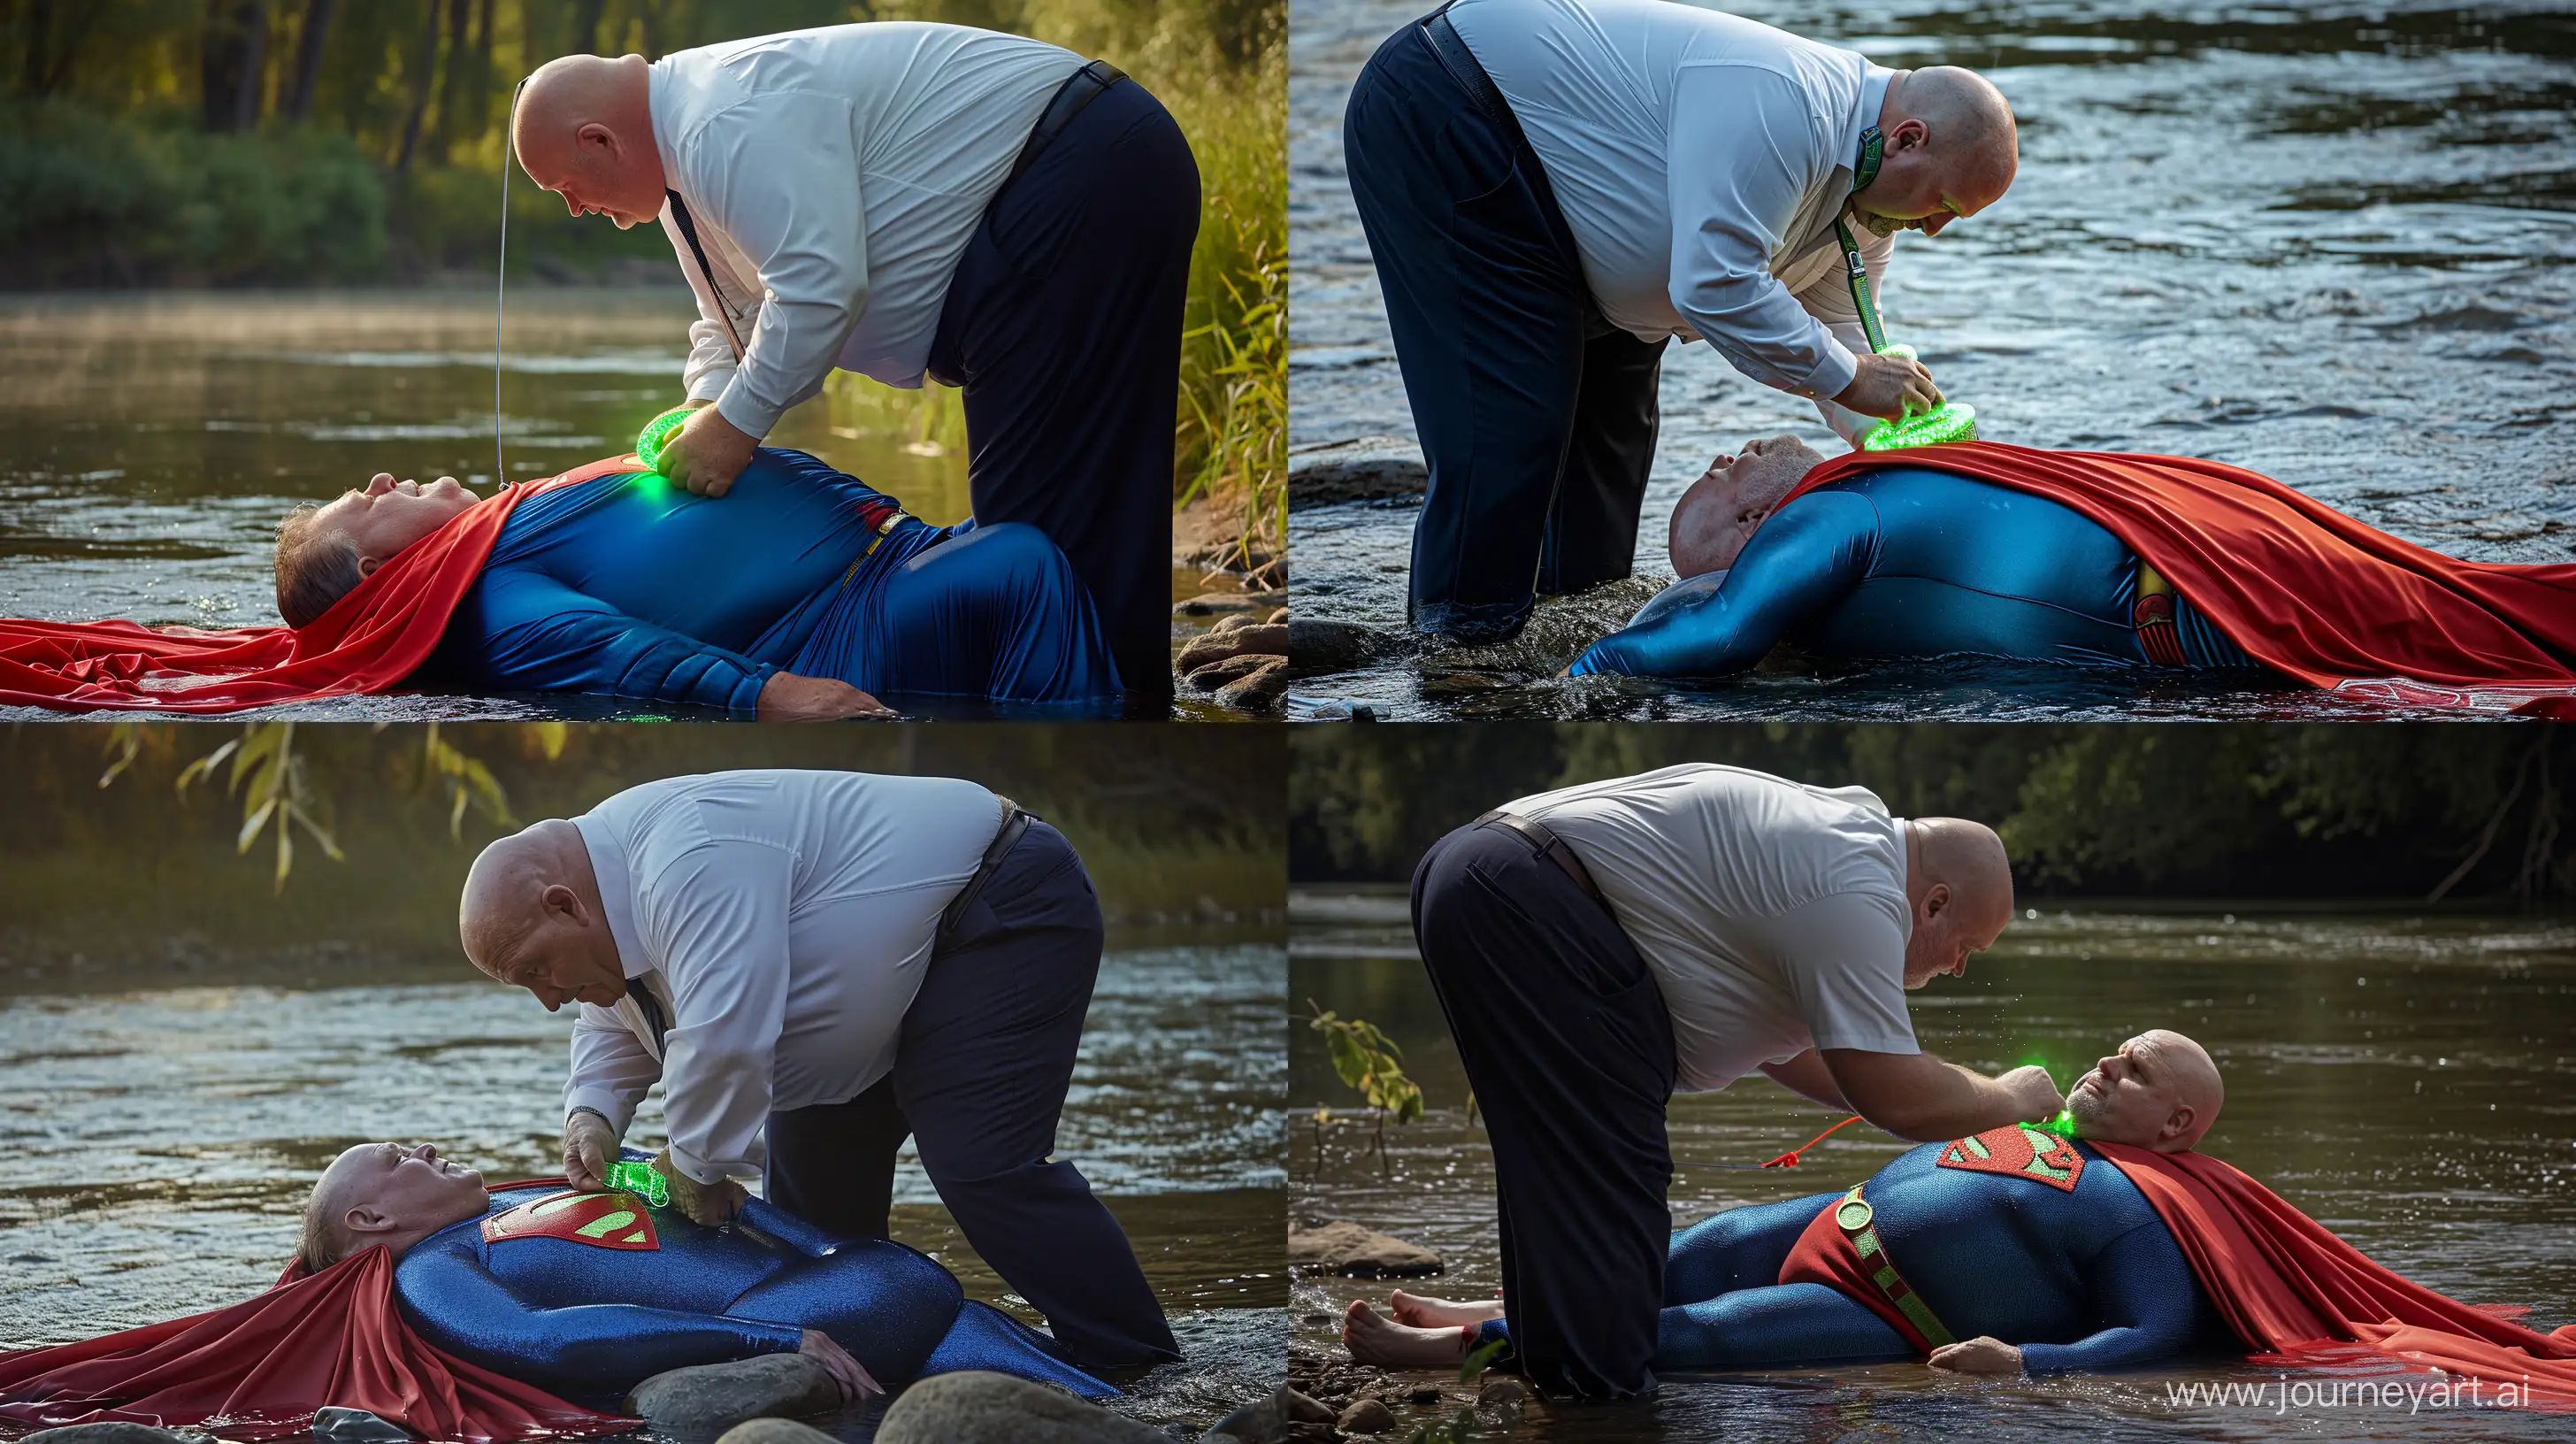 Elderly-Supermen-Collaring-a-Companion-by-the-Riverside